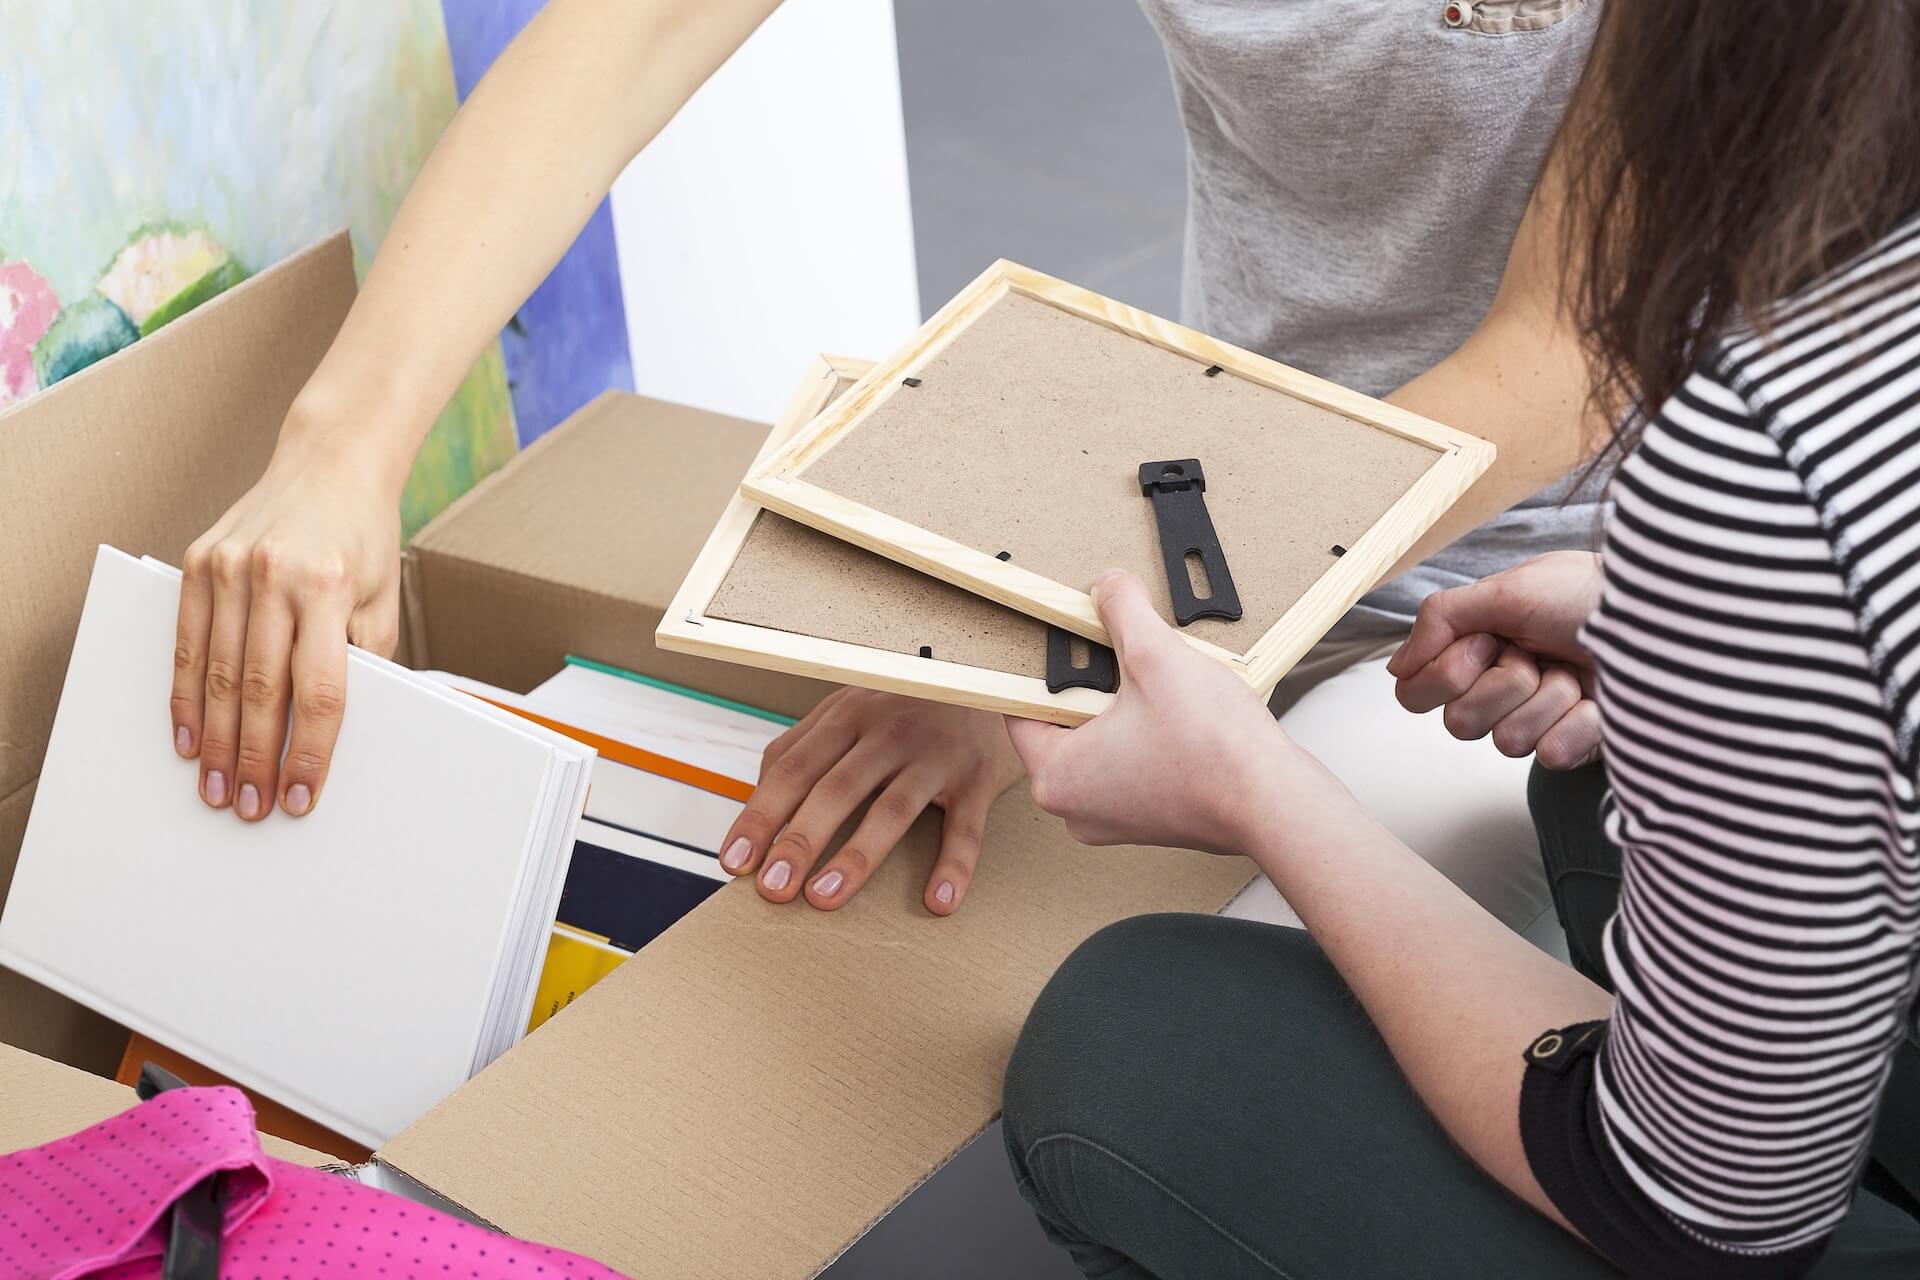 People holding picture frames above a cardboard box